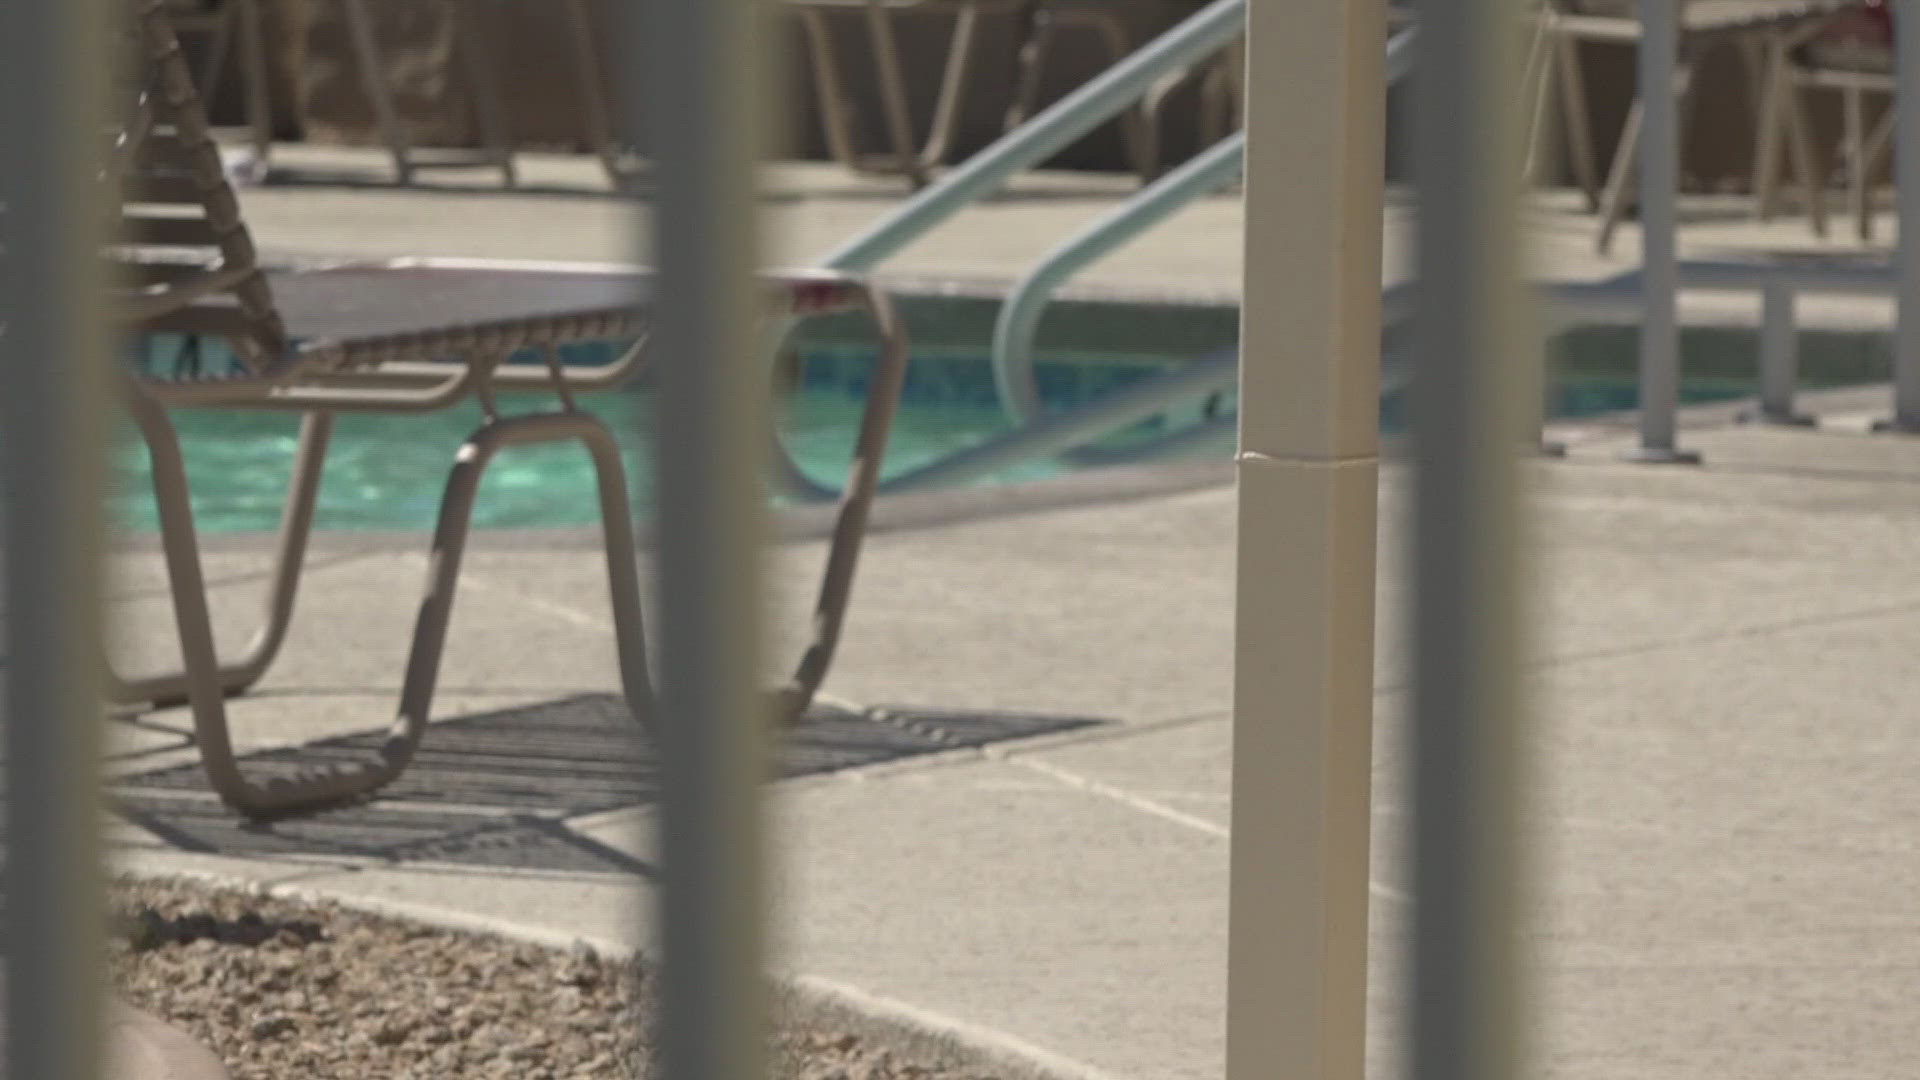 An expert shares some guidelines for keeping kids safe around swimming pools this summer season in the Phoenix area.